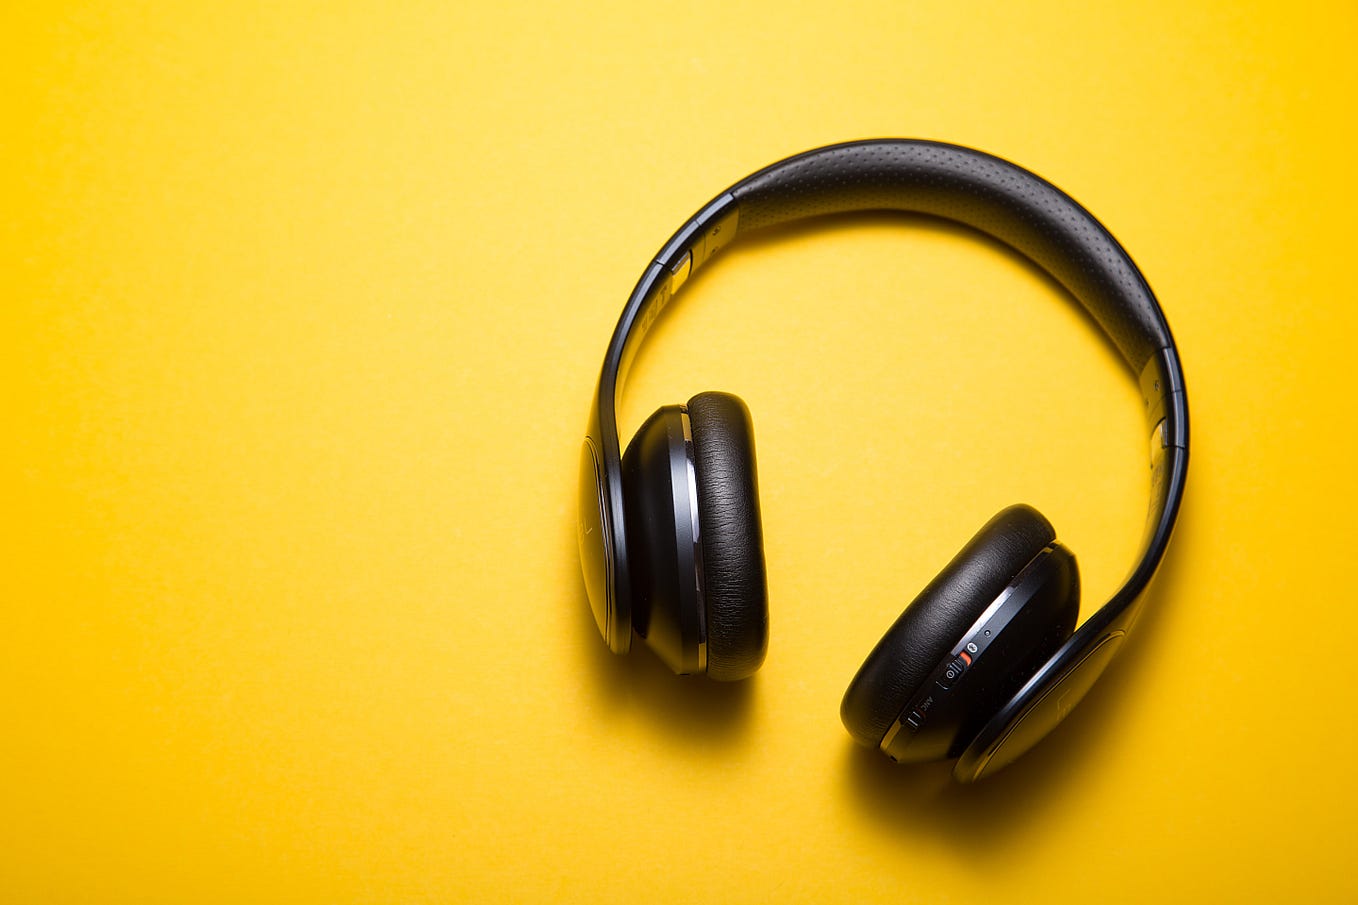 A pair of headphones on a bright yellow background